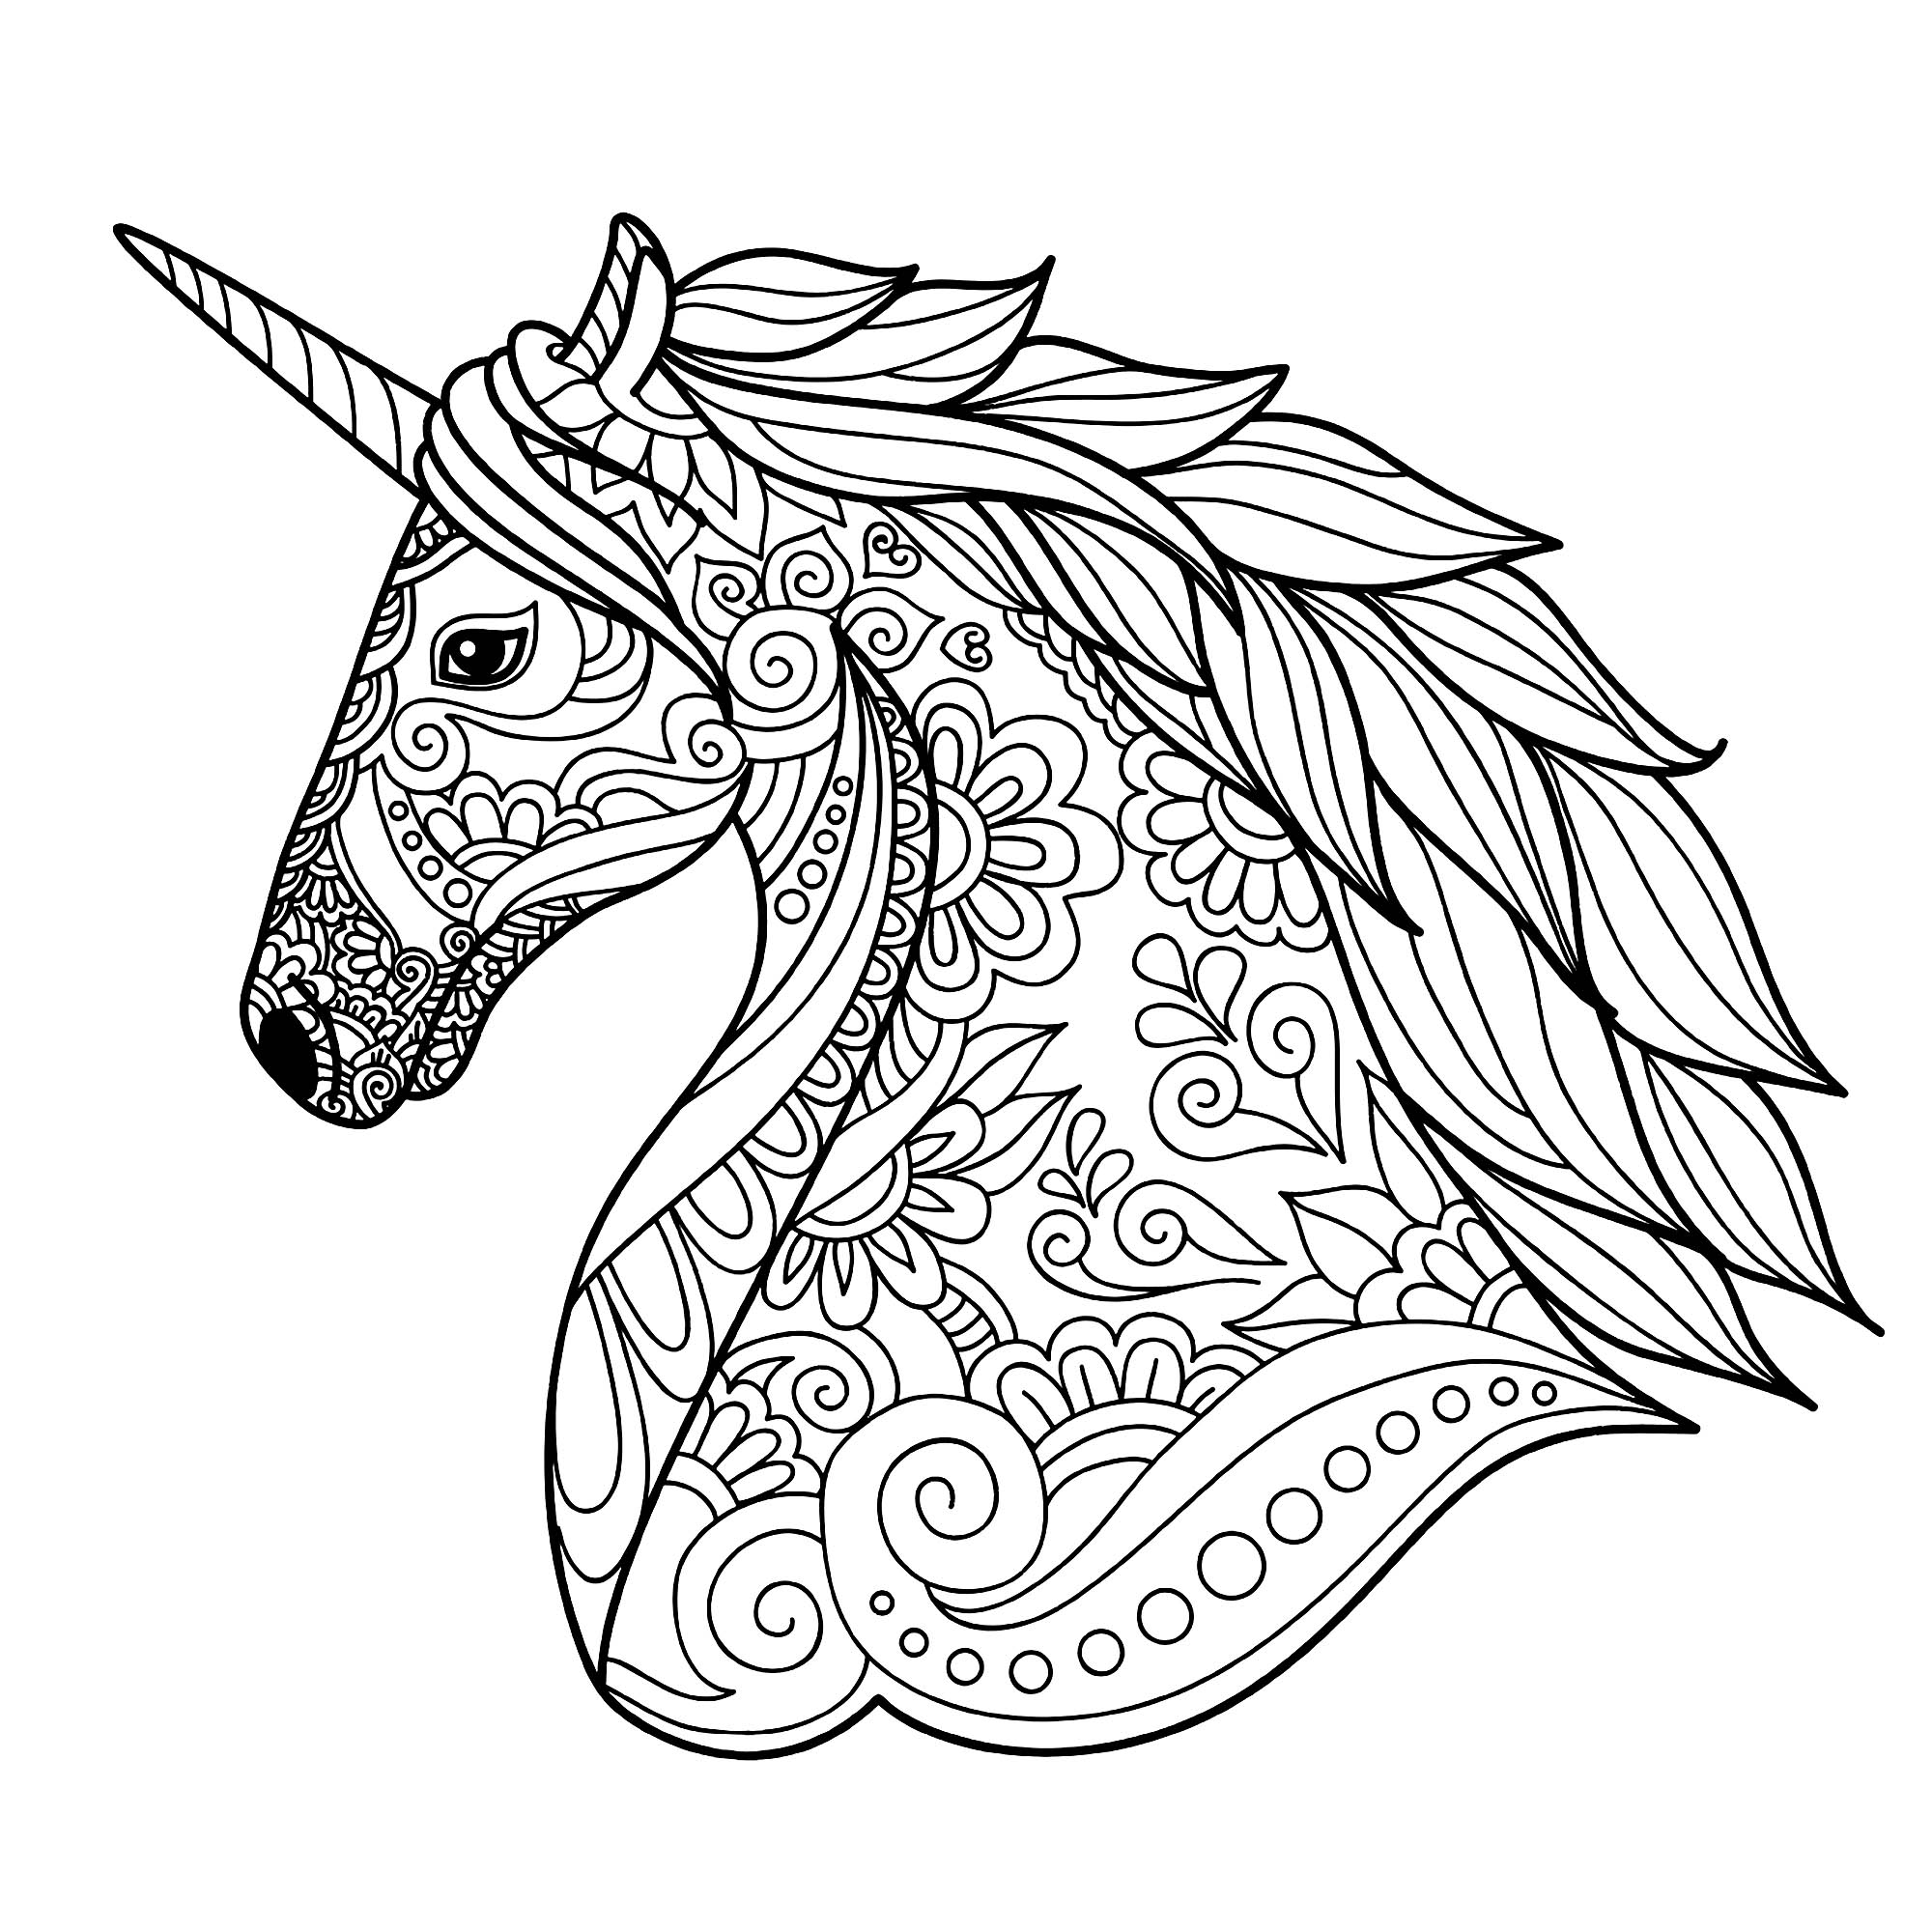 Unicorn head simple - Unicorns Adult Coloring Pages